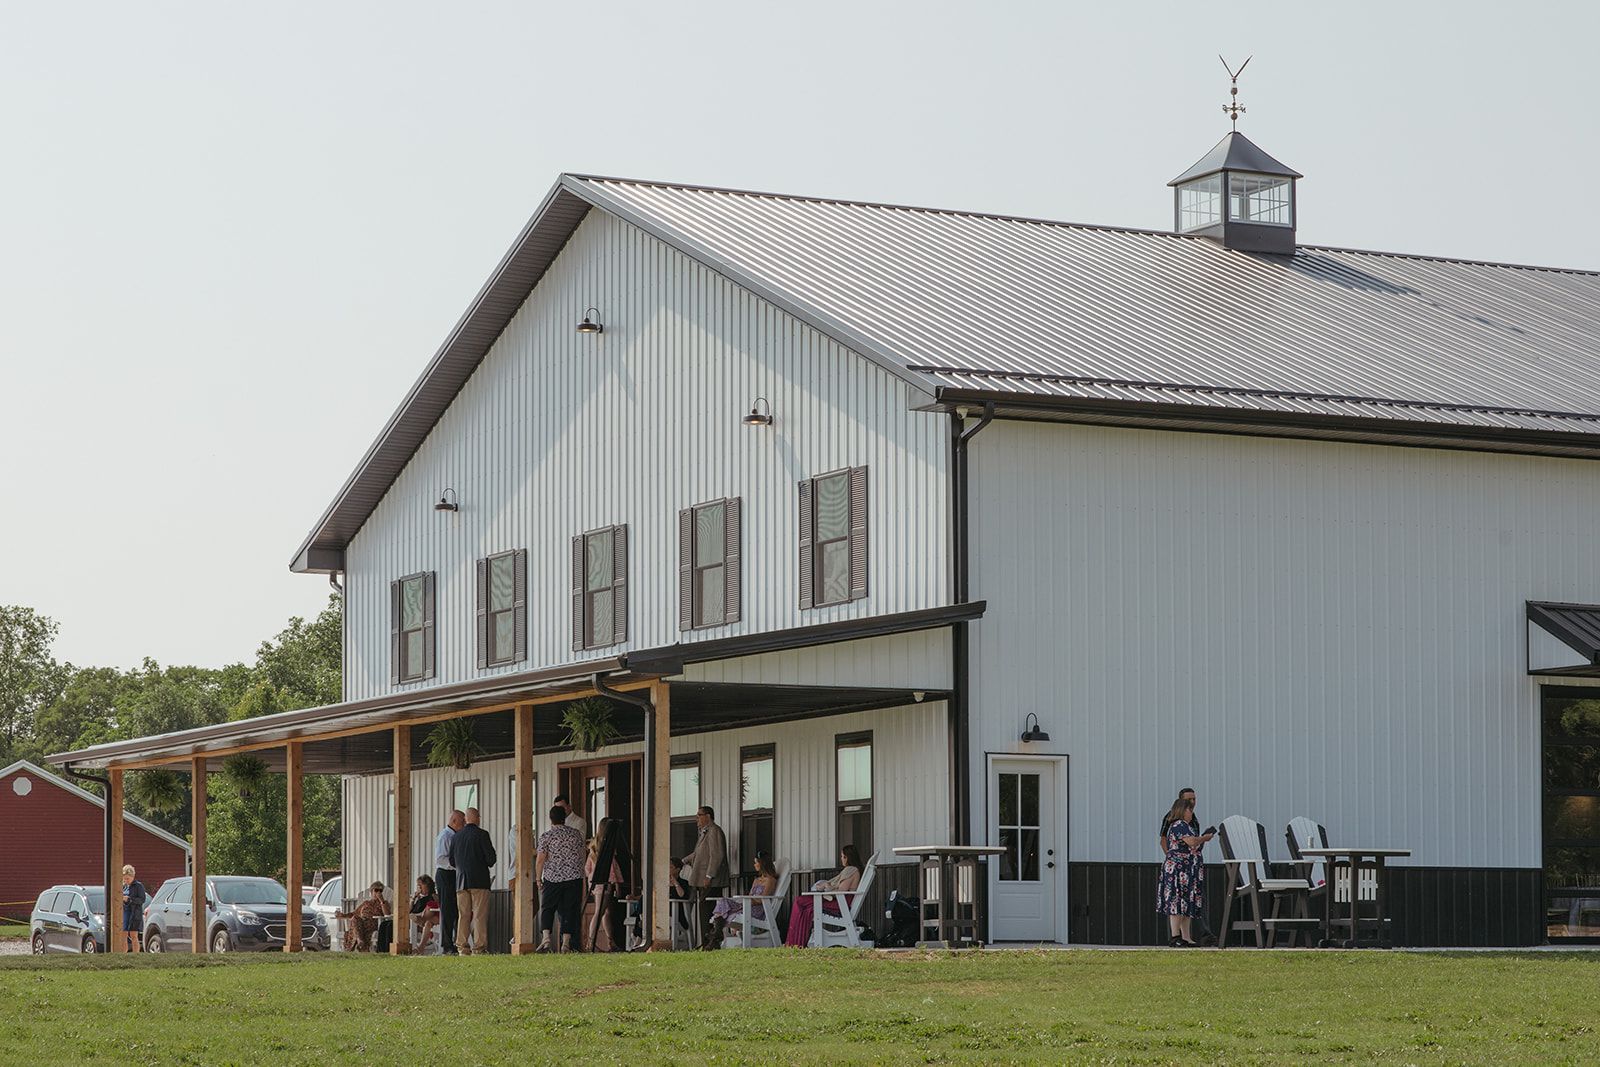 Our Newly Built Wedding Barn Is Modern Yet Rustic & Ready to Host Your Dream Wedding in Mid-Mo.